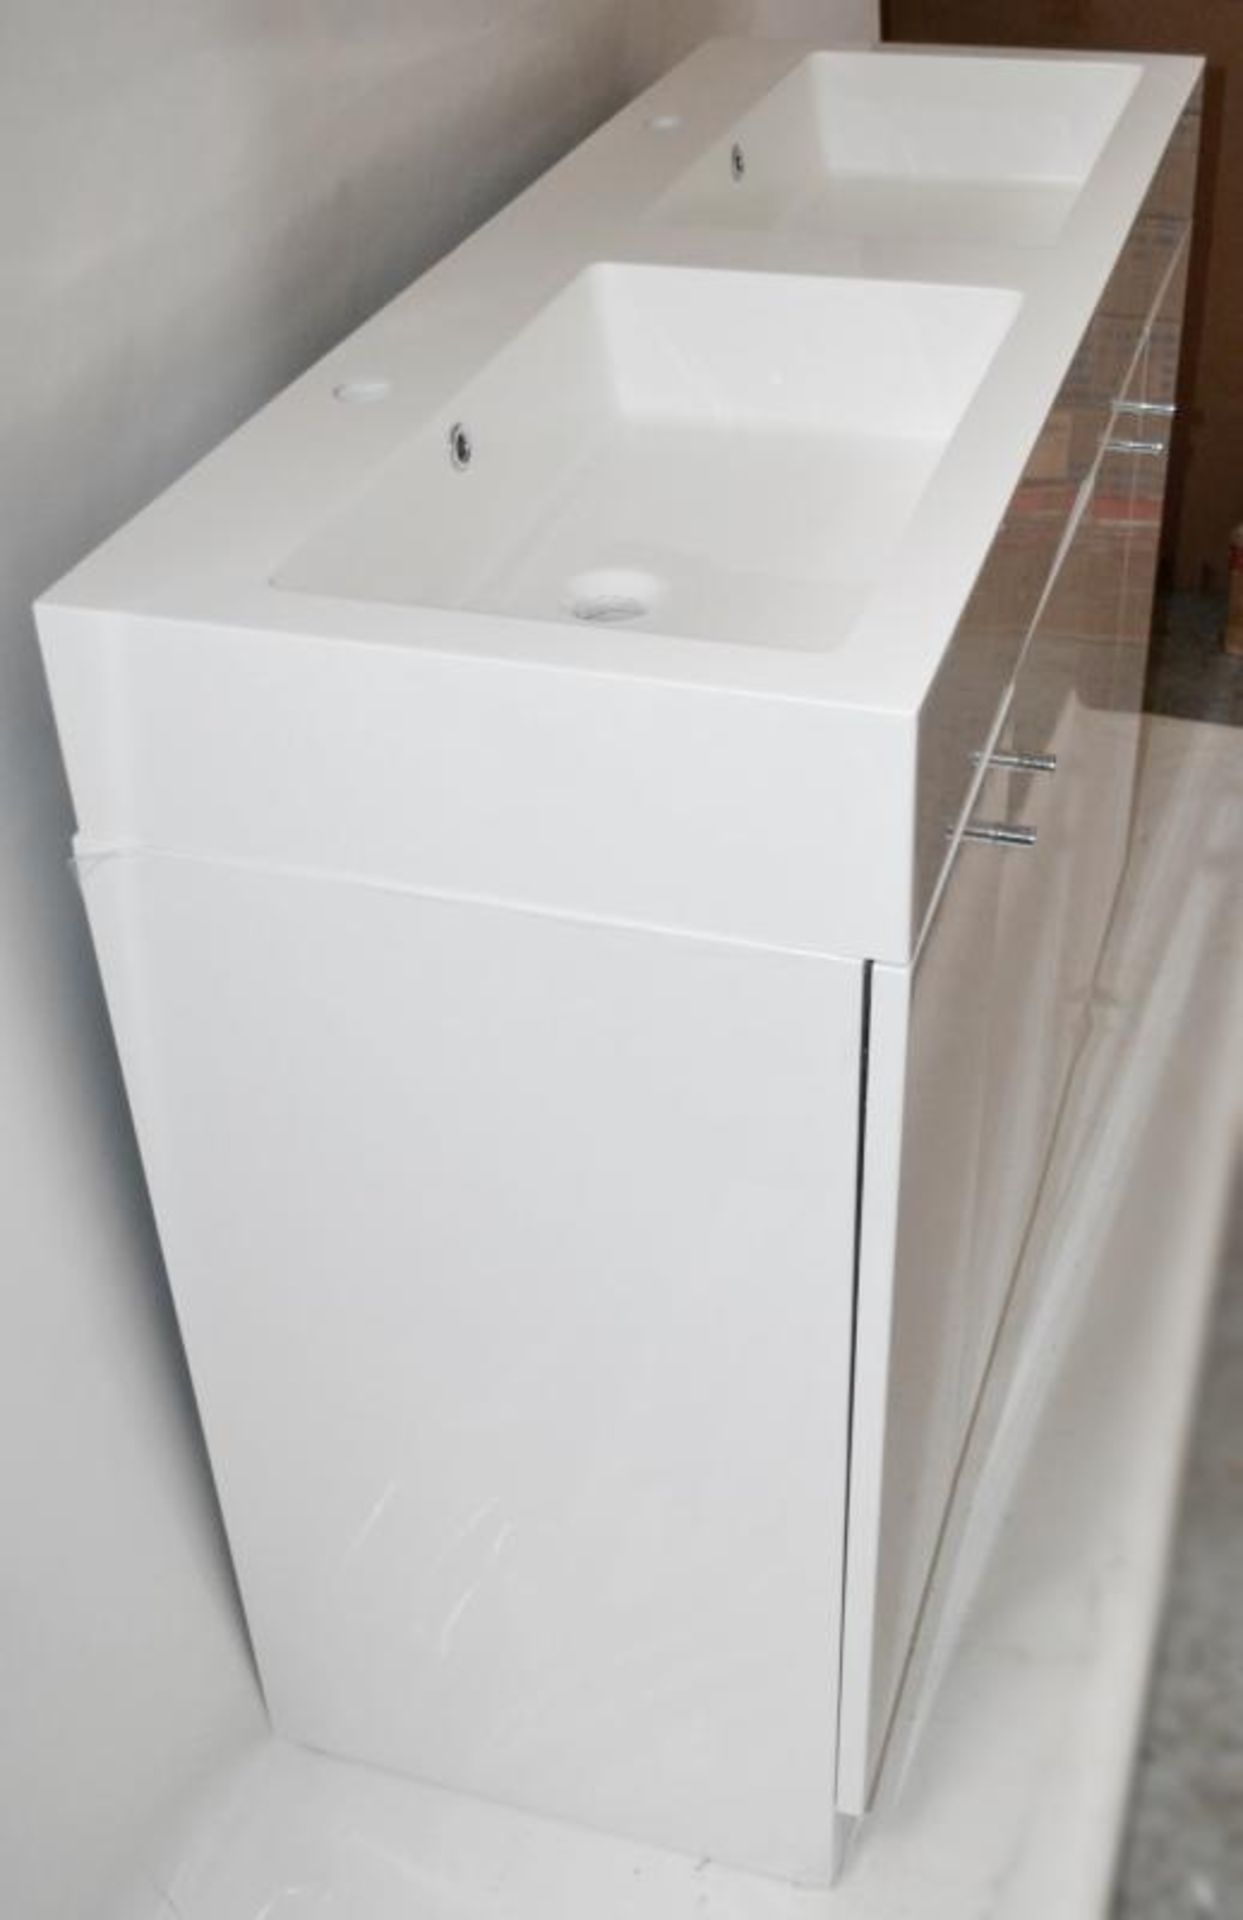 1 x Gloss White 1200mm 4-Door Double Basin Freestanding Bathroom Cabinet - New & Boxed Stock - CL307 - Image 4 of 7